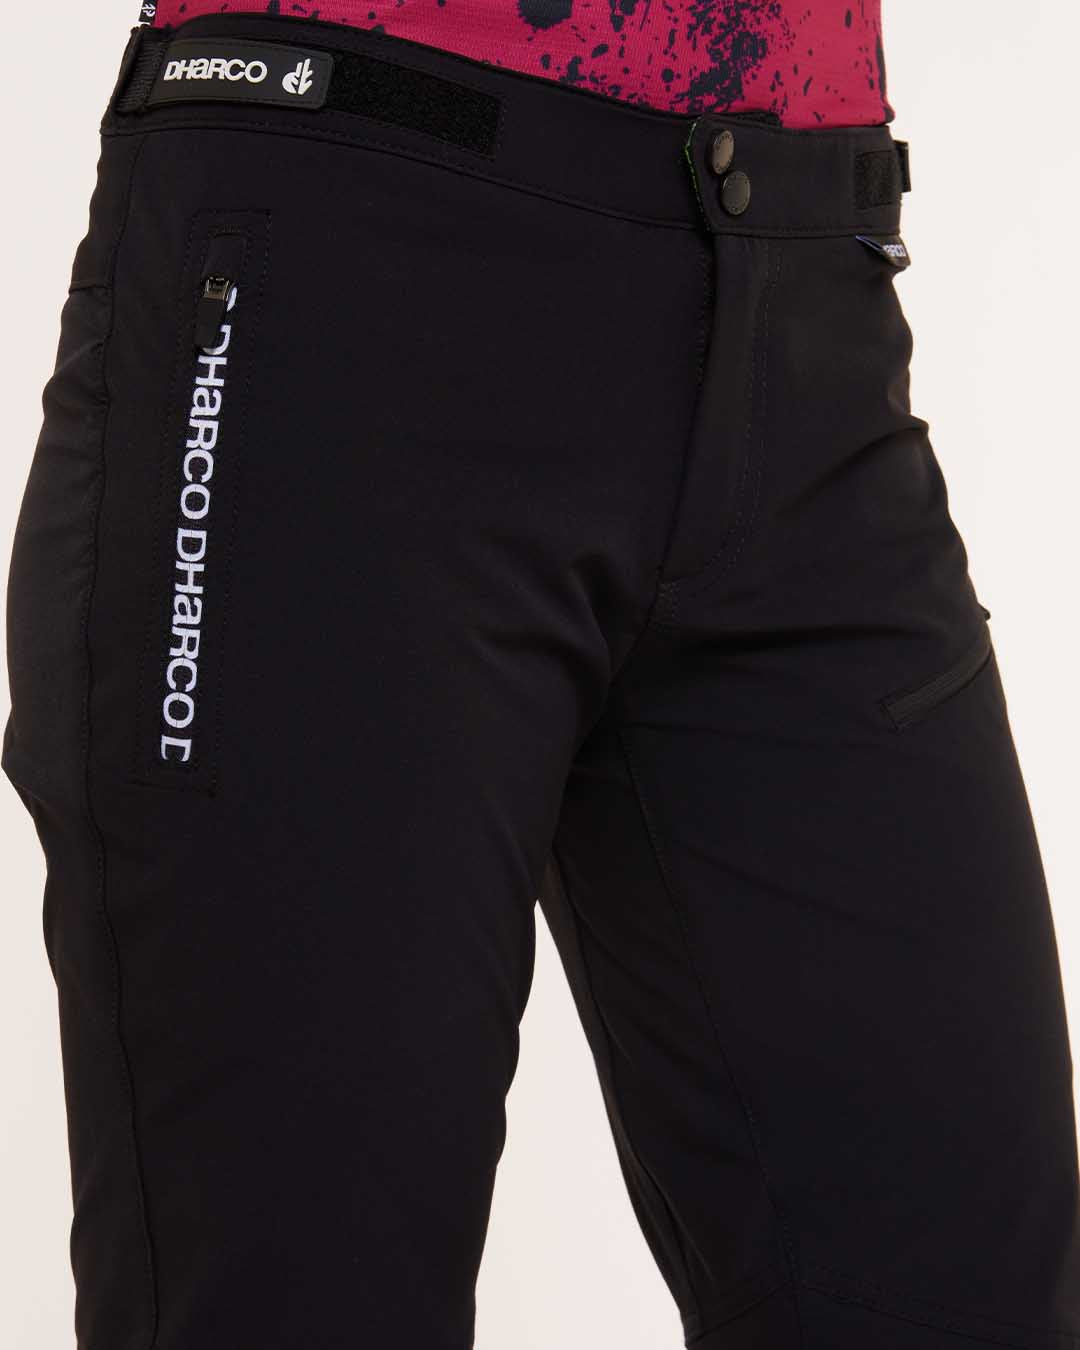 BLACK WOMEN'S FABRIC PANTS WITH POCKETS